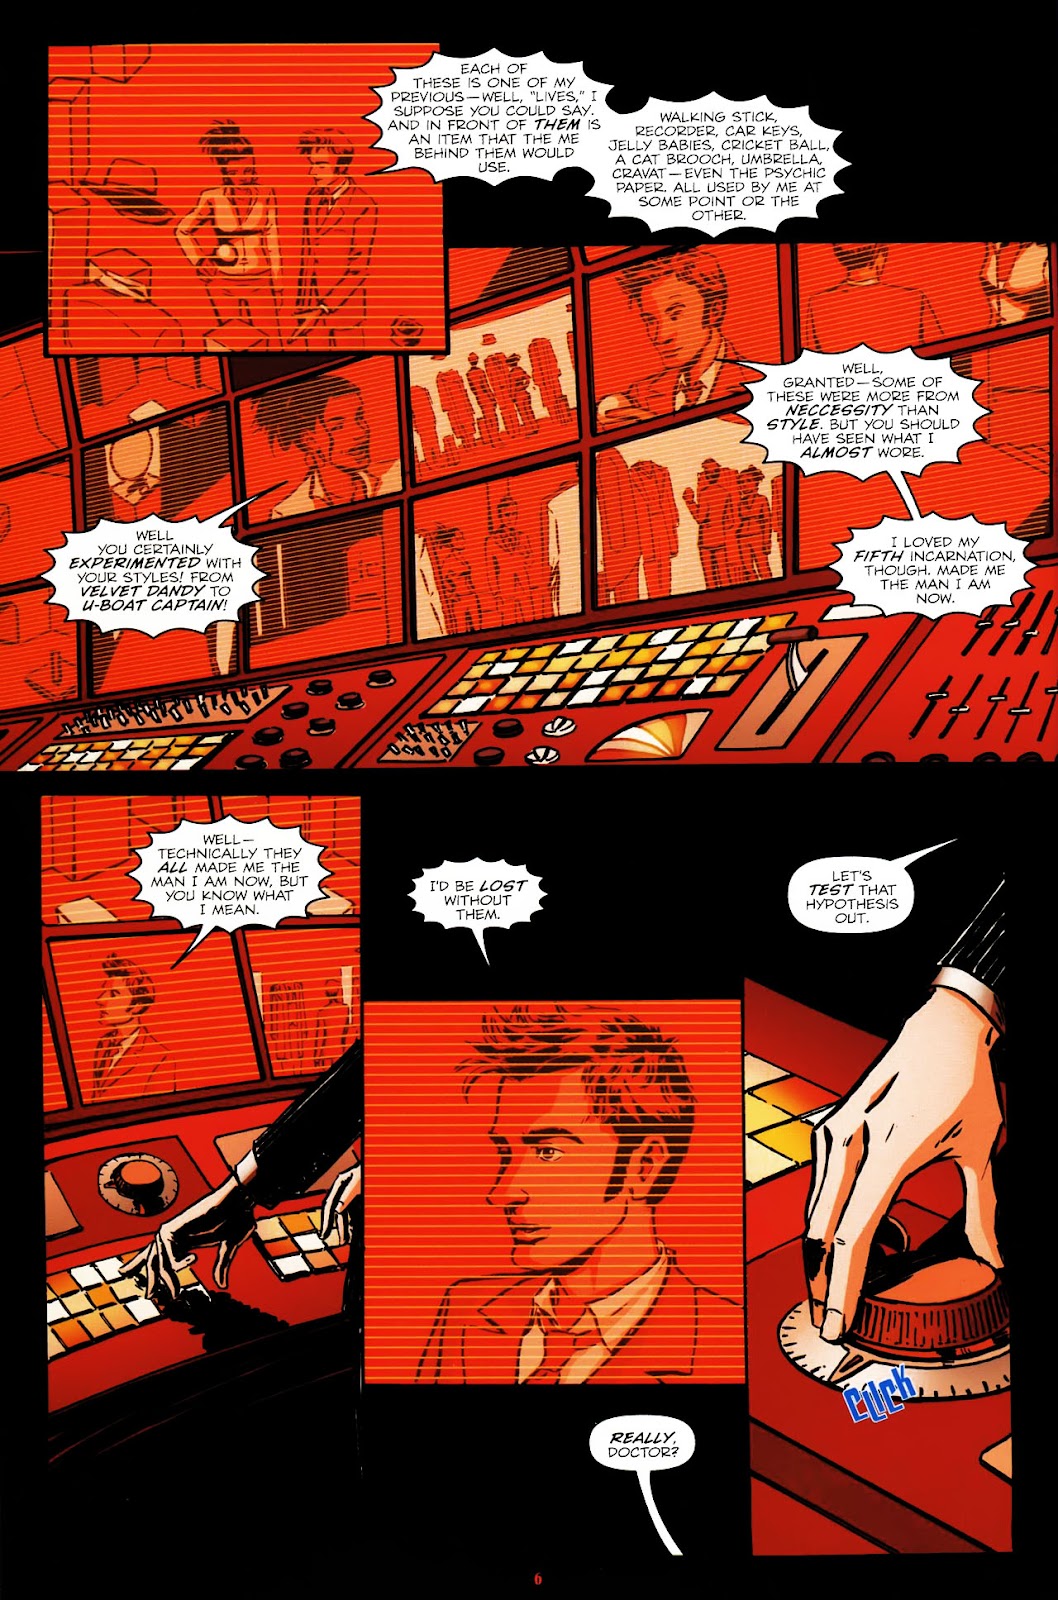 Doctor Who: The Forgotten issue 1 - Page 8